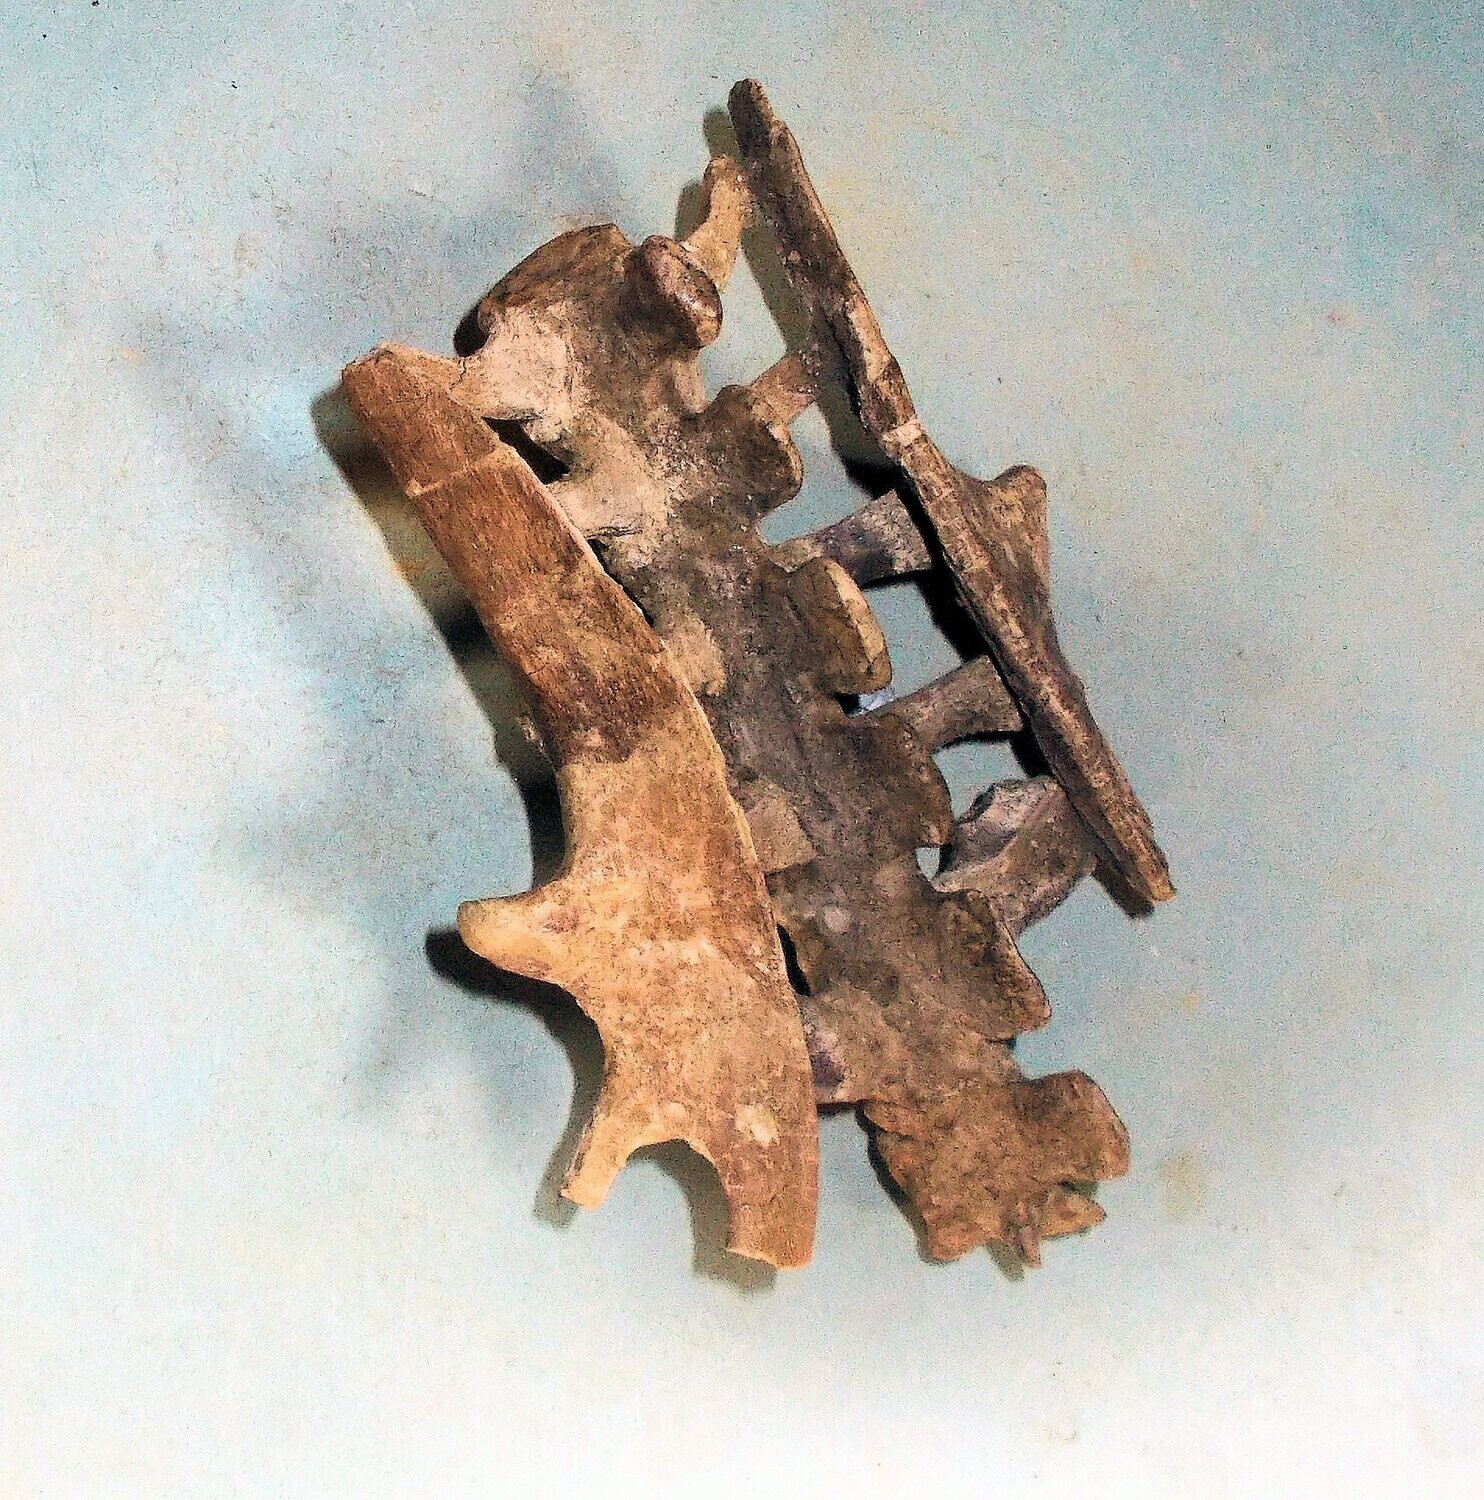 Fine 13cm X 9cm  articulated vertebrae and pelvic structure of Psittacosaurus mazongshensis  from the Lower Xinminbao Formation of Ganzu Province, China.